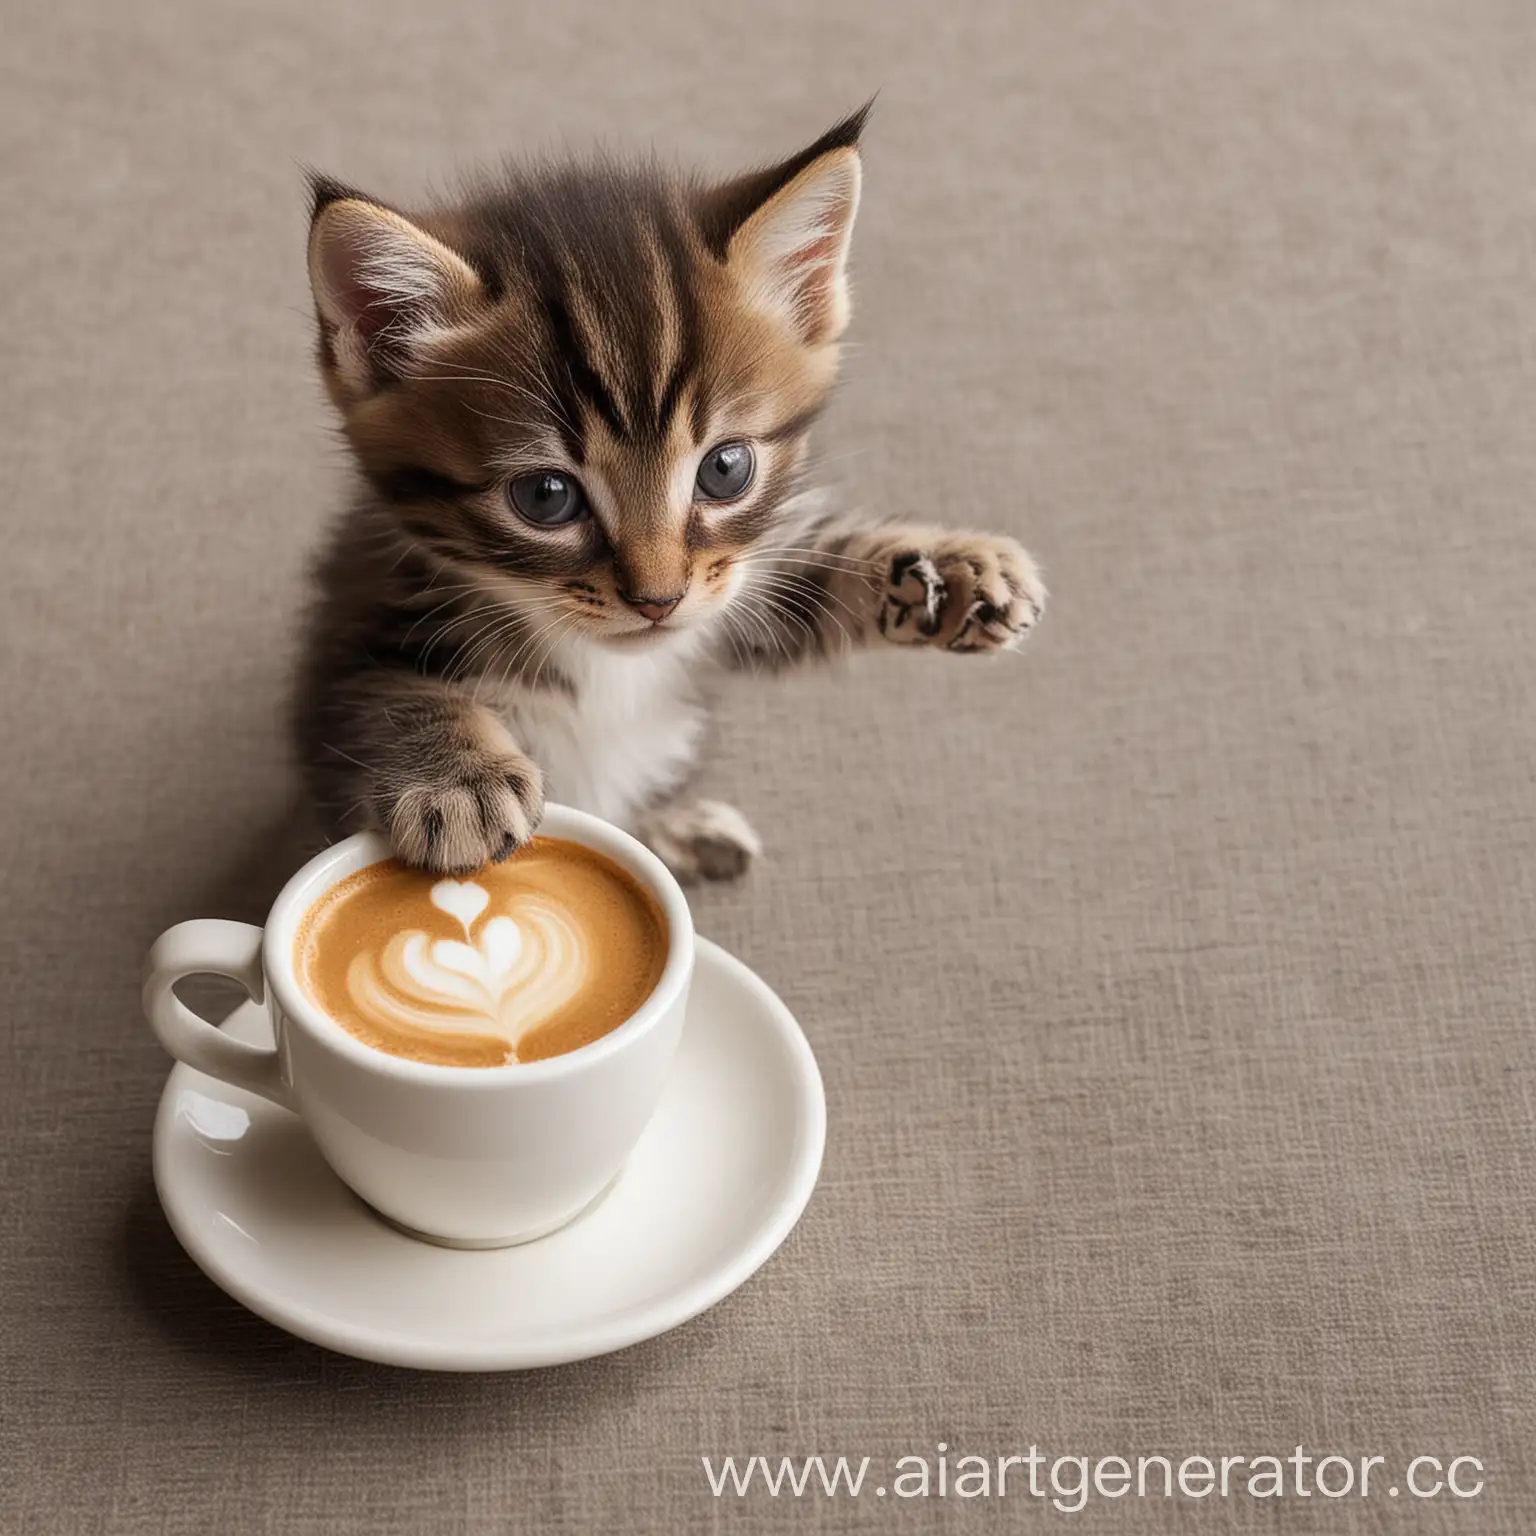 Kitten-Holding-Coffee-Cup-with-Playful-Curiosity